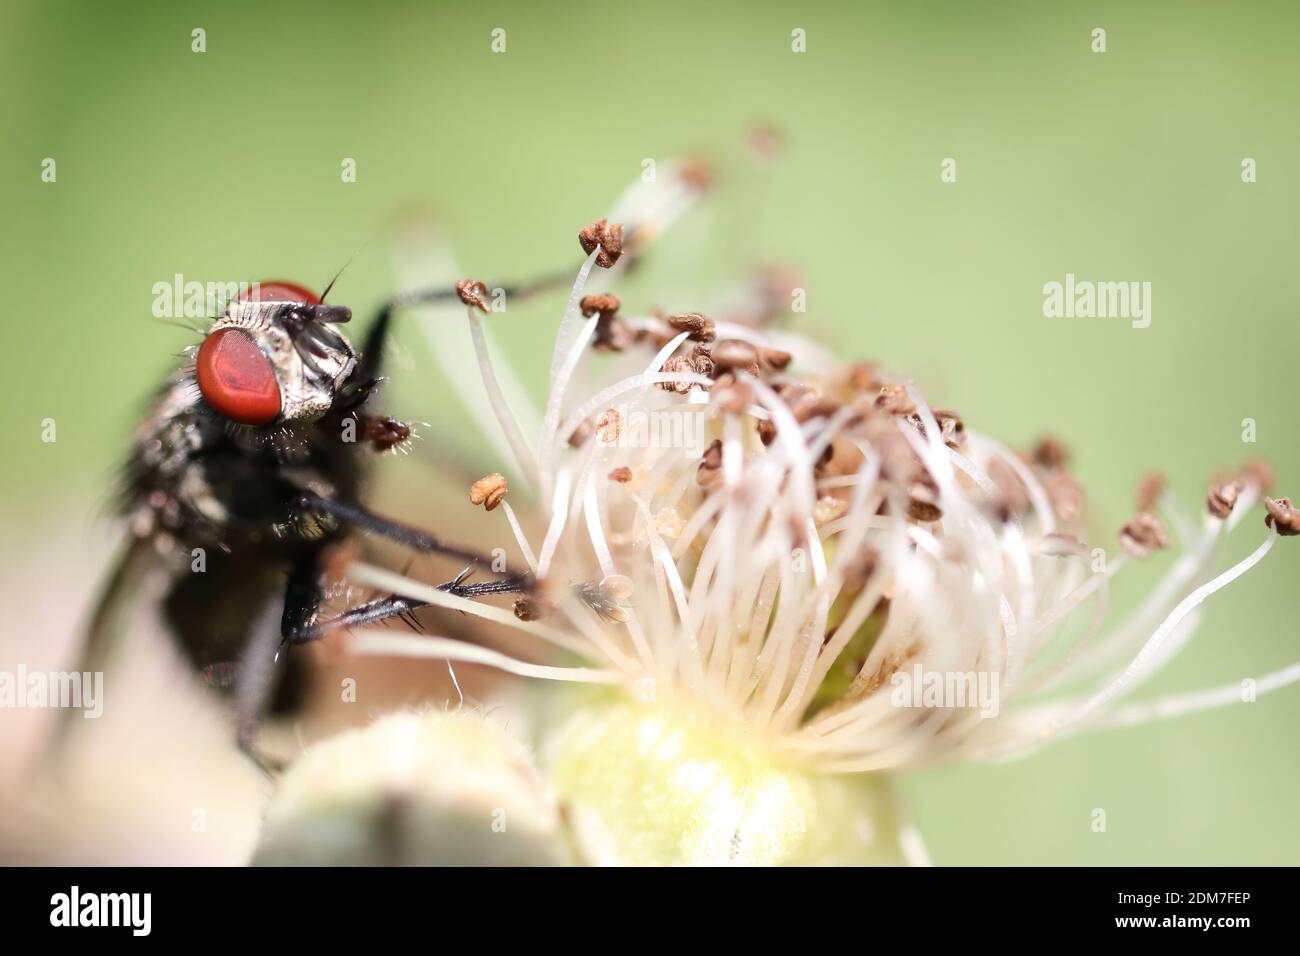 Macro of a common housefly on a flower with a green background Stock Photo